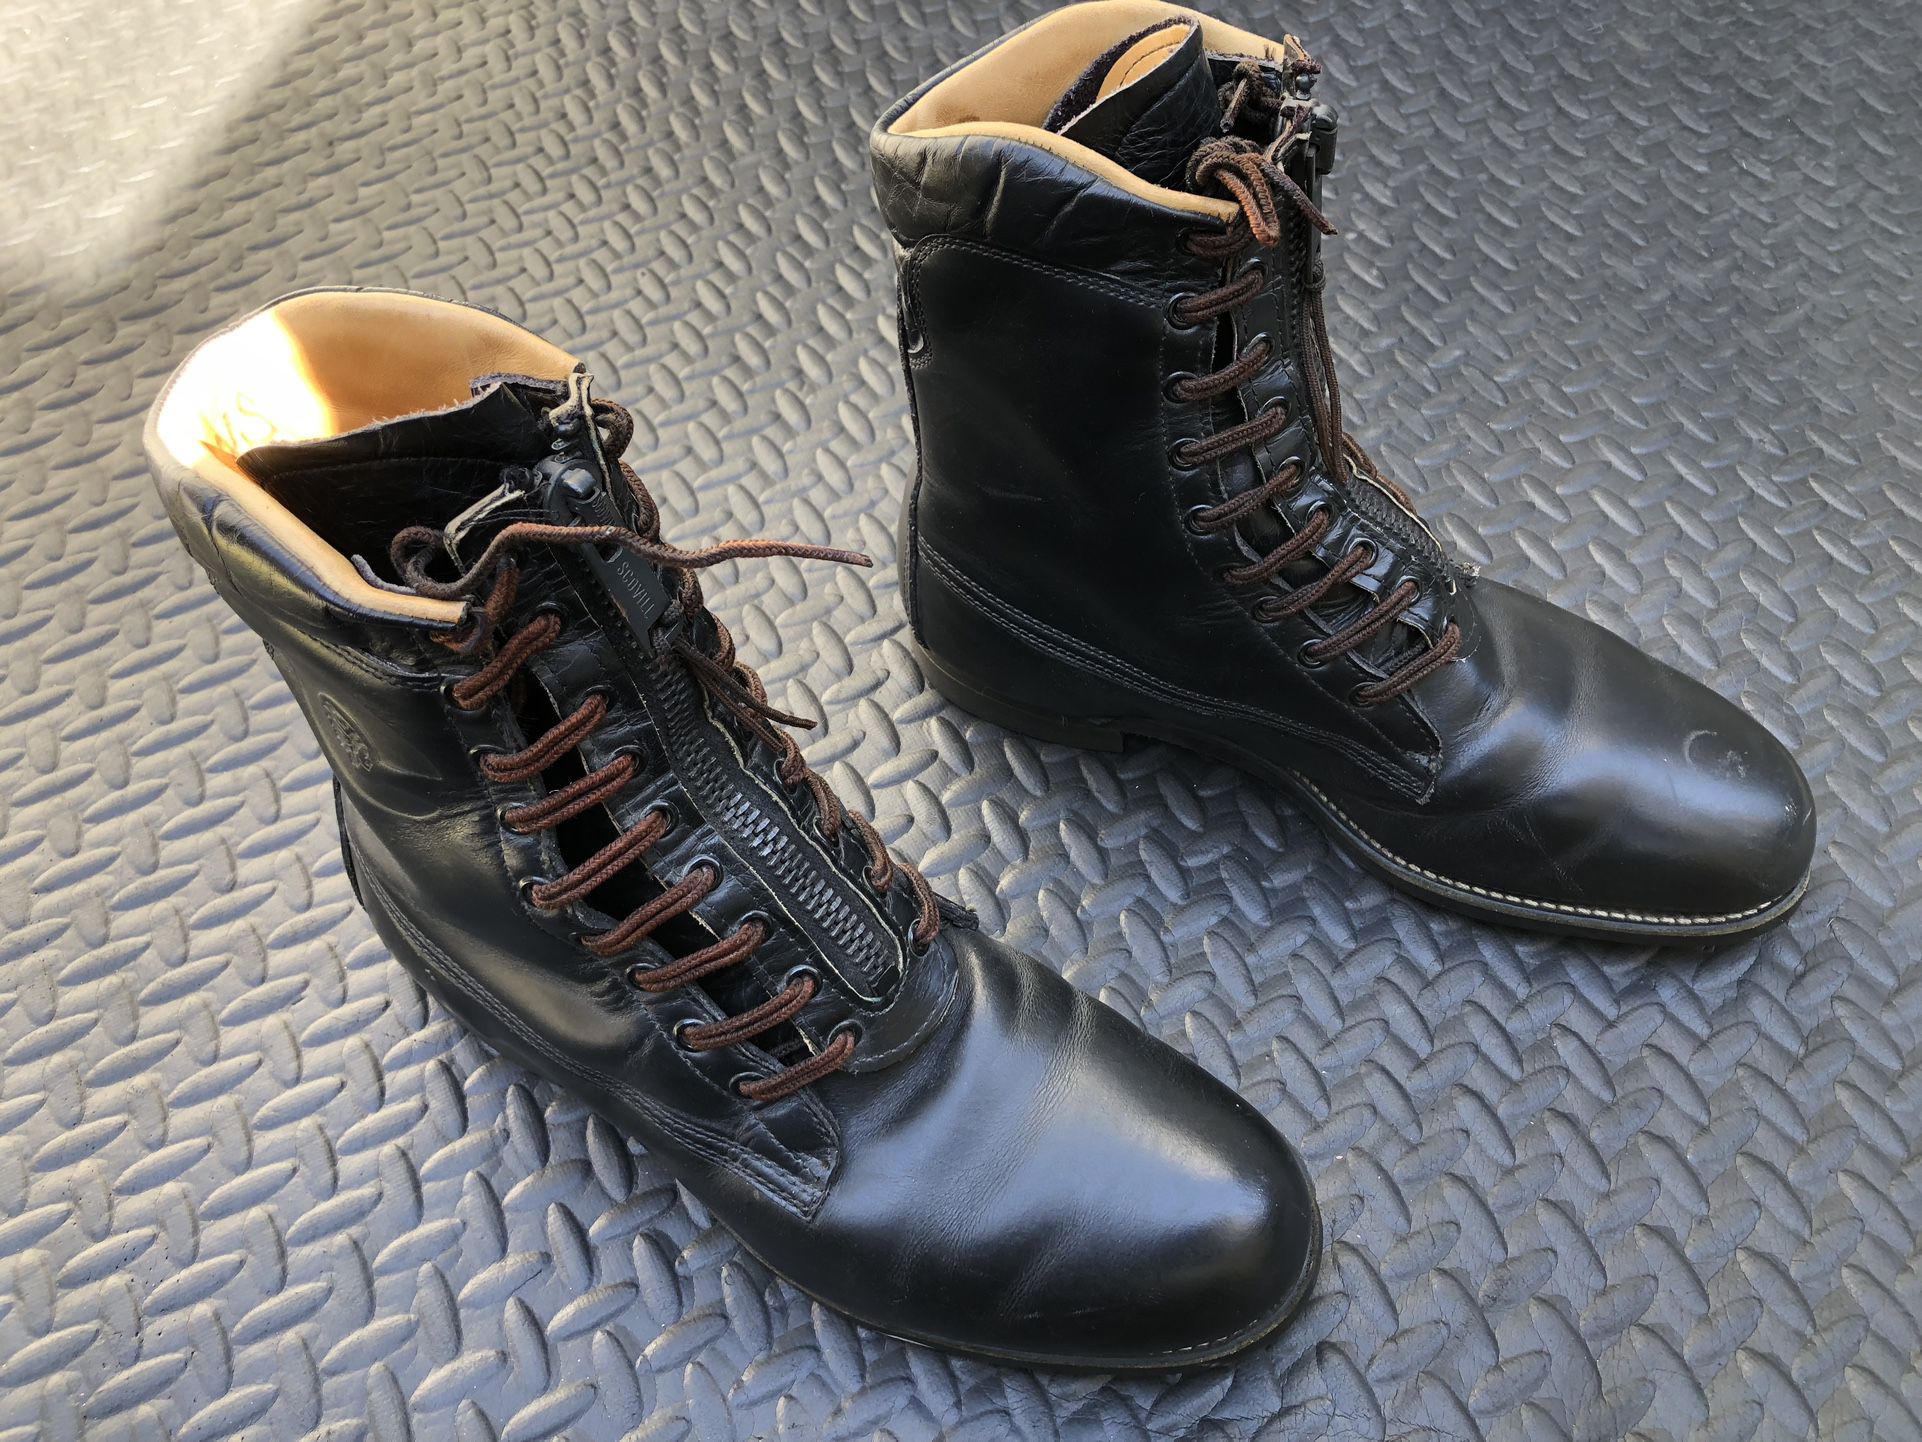 Chippewa Work Boot Motorcycle Boot Leather Quality Boots Size 9 1/2  $60 firm